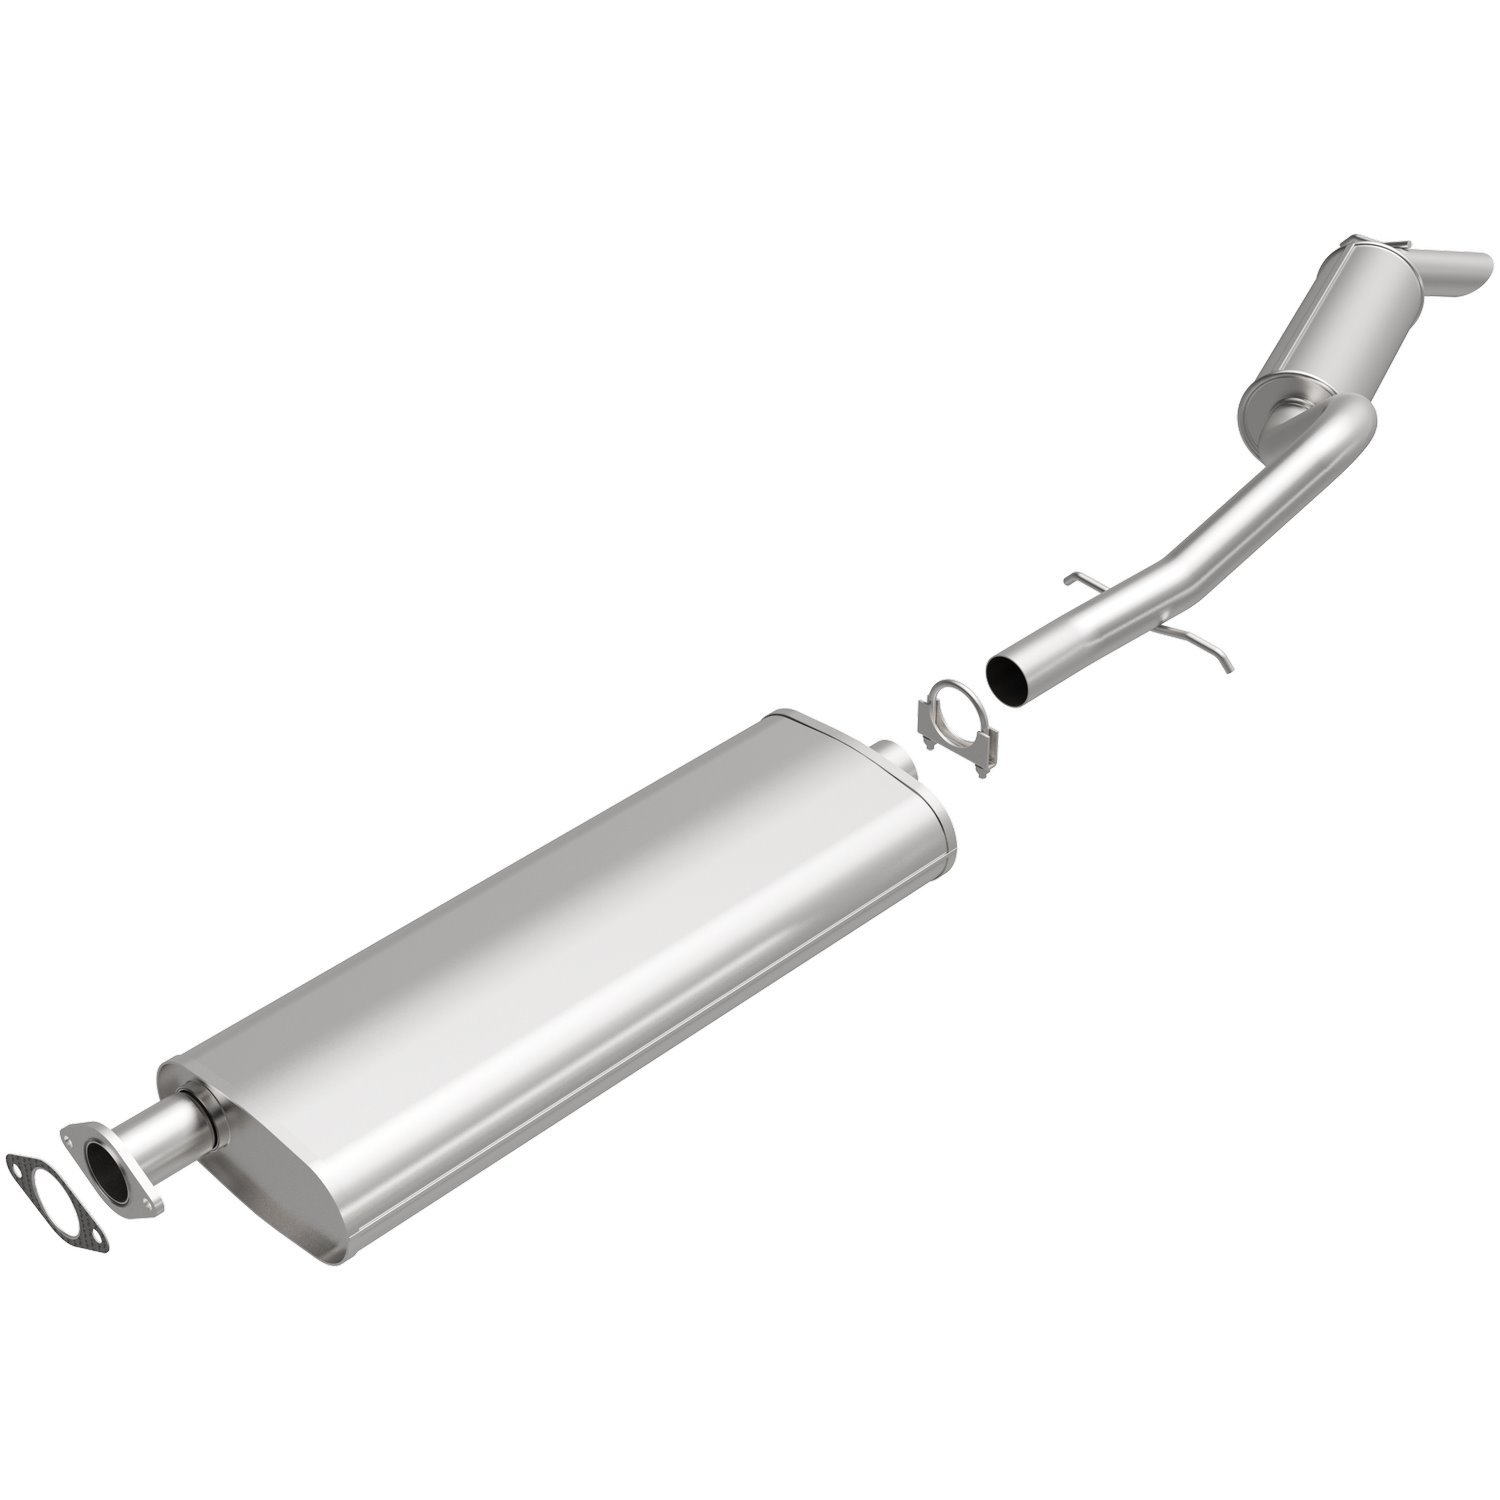 Direct-Fit Exhaust Kit, 1997-2001 GM Venture/Silhouette/Montana 3.4L